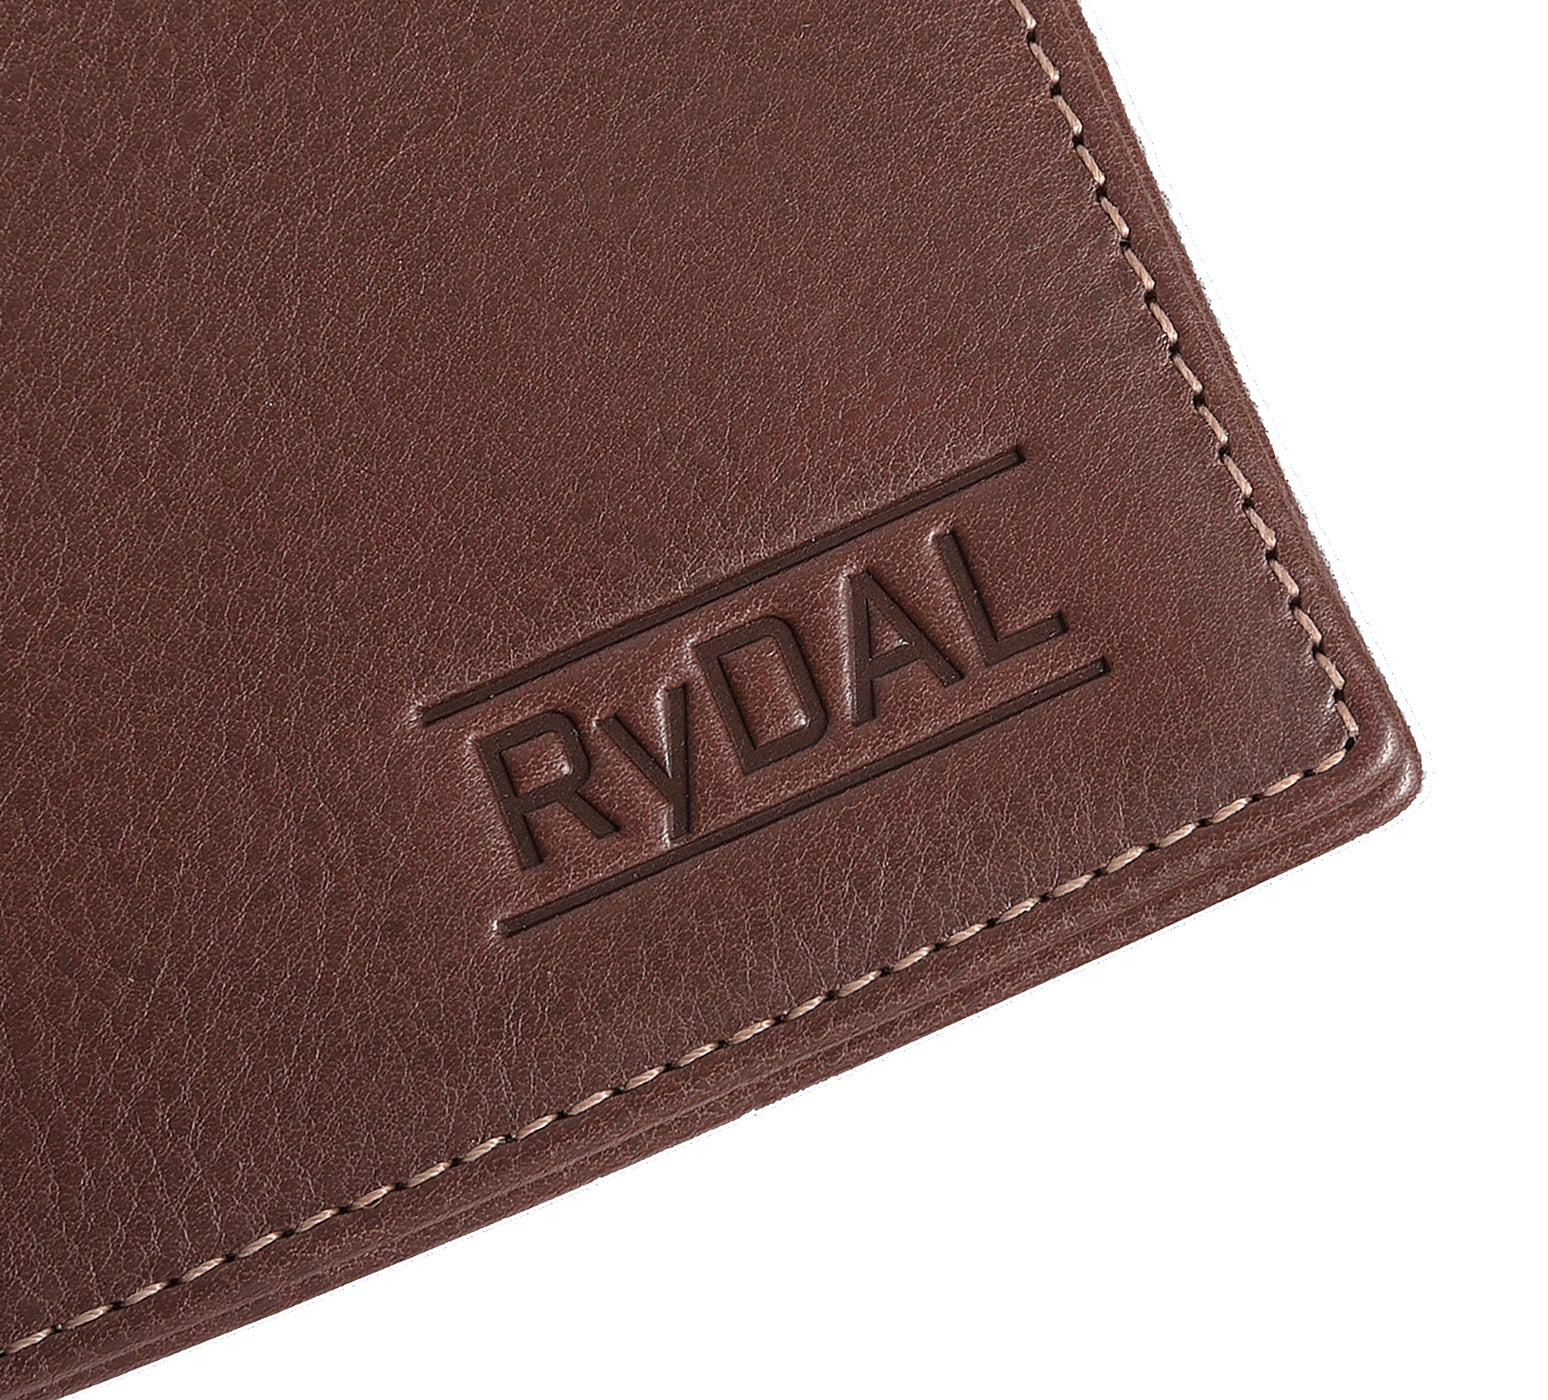 Mens Leather Wallet with Coin Pocket from Rydal in 'Dark Brown' showing close up of logo.